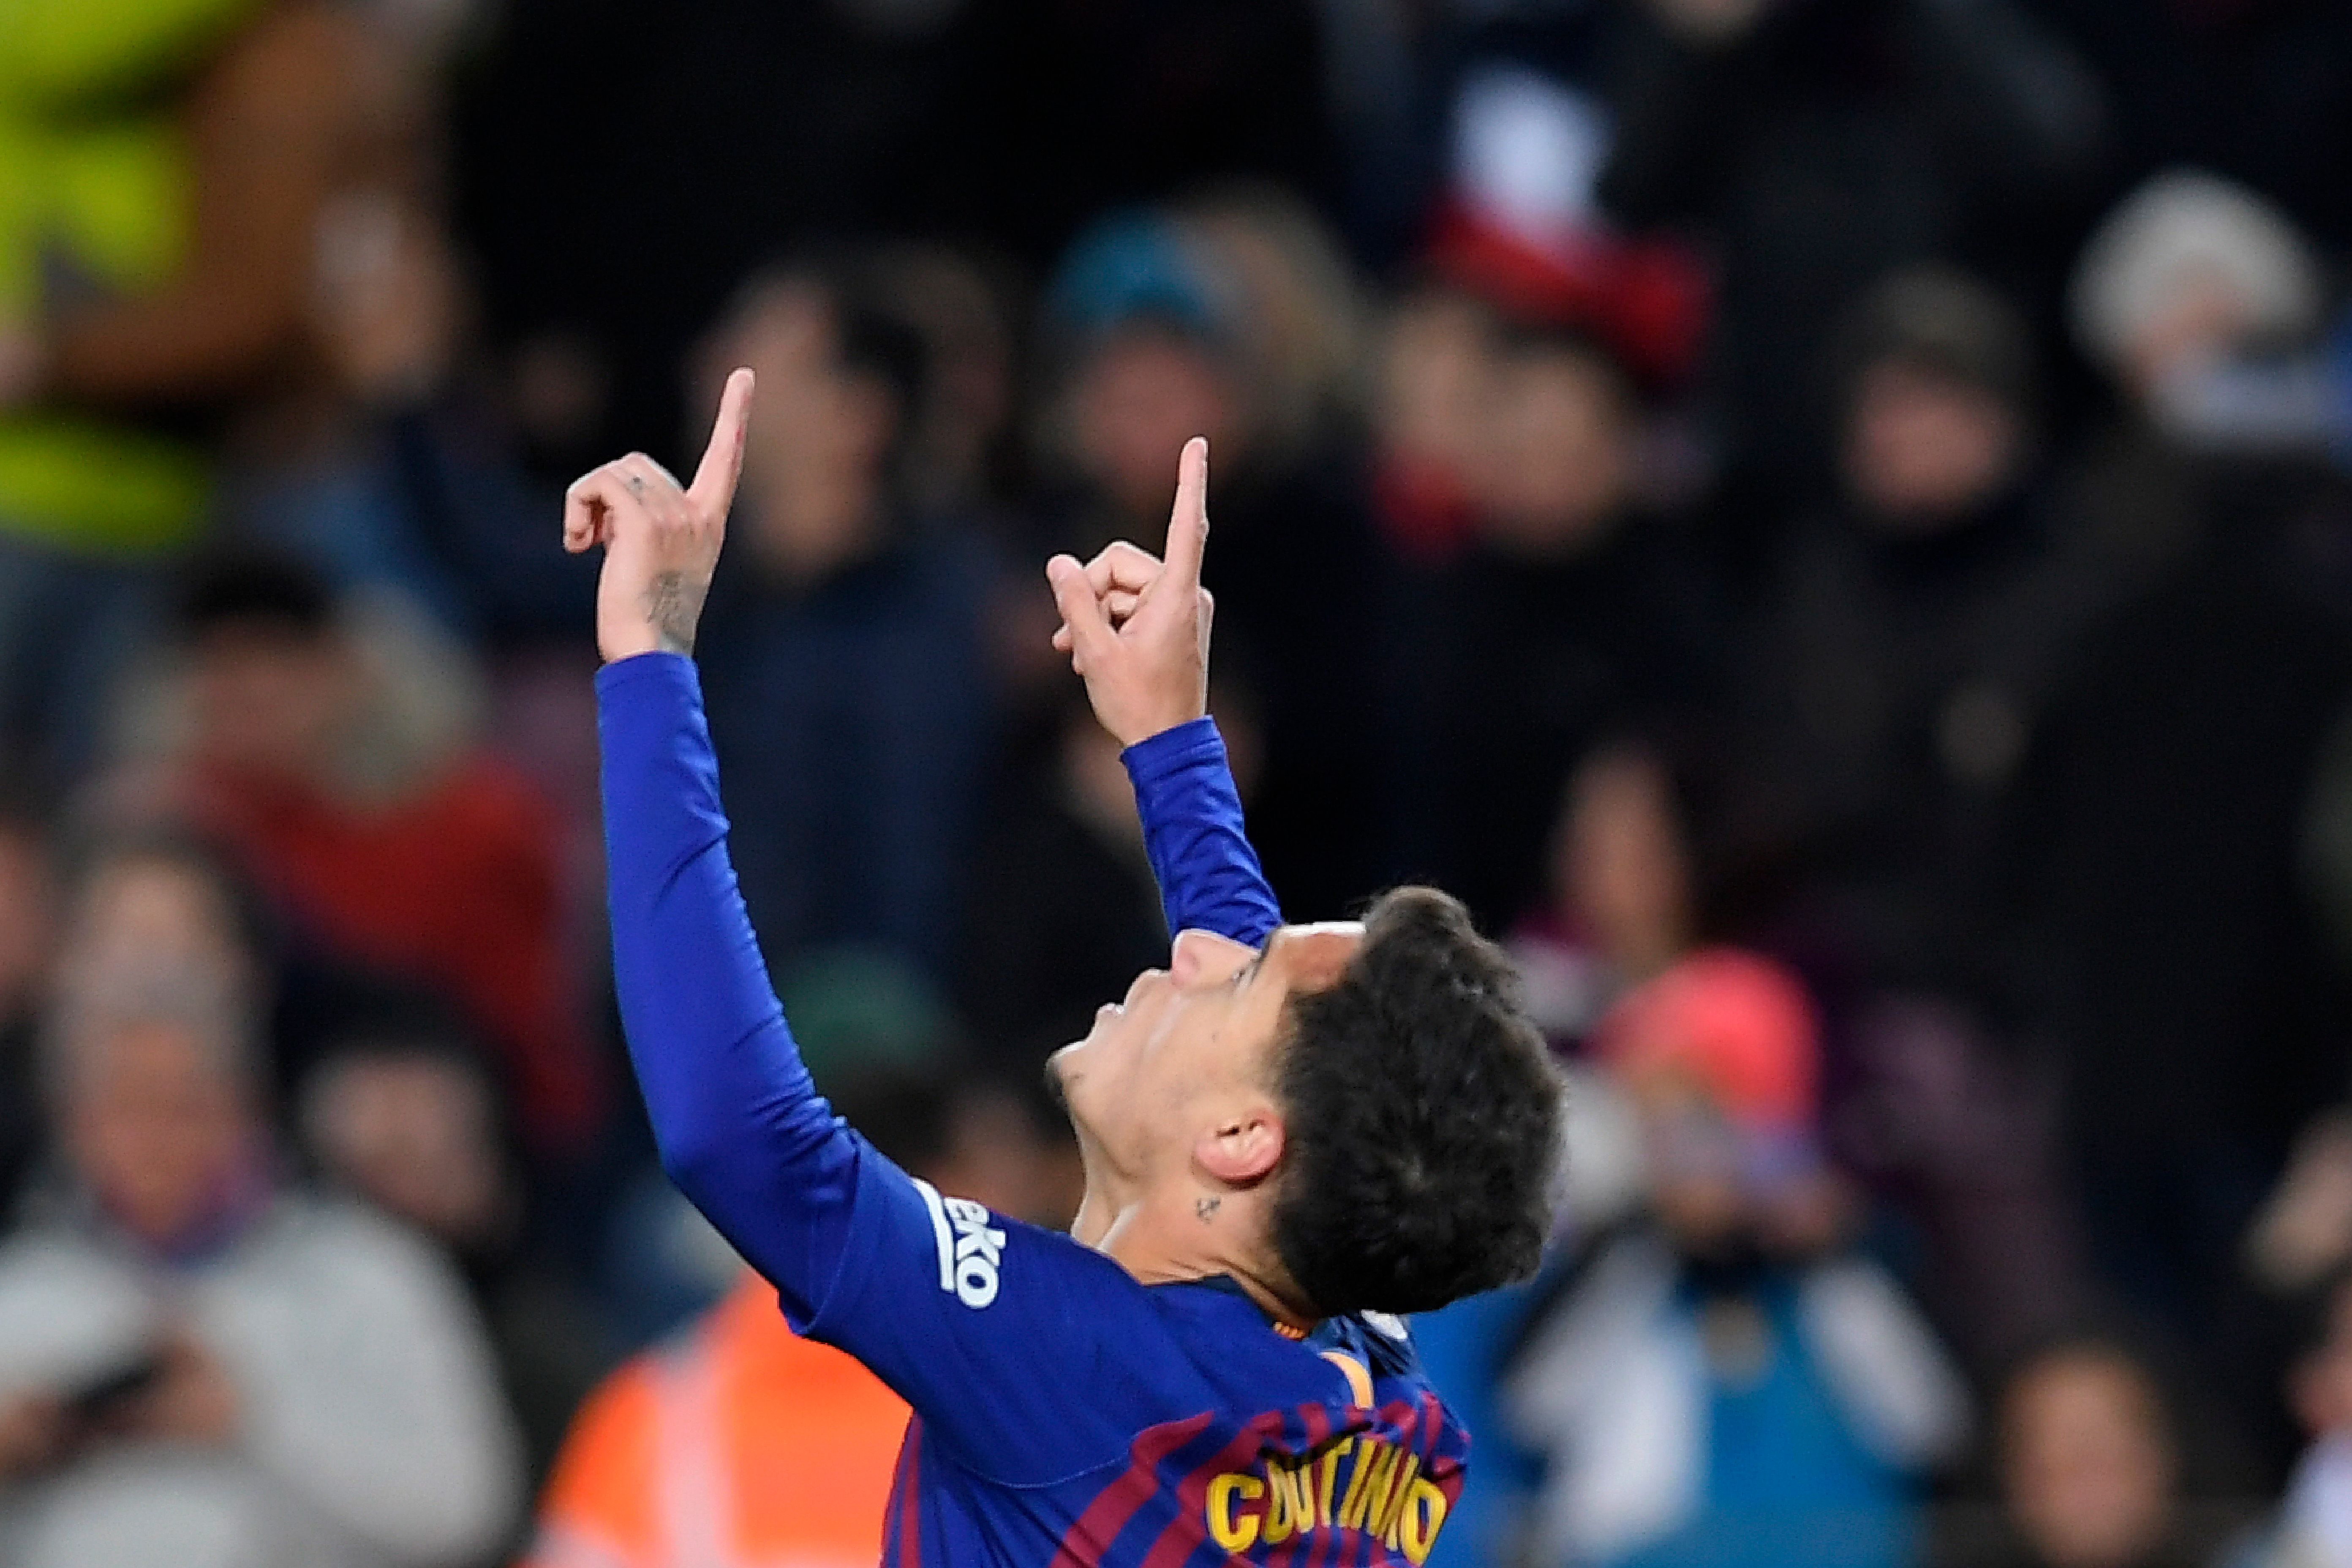 Barcelona's Brazilian midfielder Philippe Coutinho celebrates after scoring a goal during the Spanish Copa del Rey (King's Cup) quarter-final second leg football match between Barcelona and Sevilla at the Camp Nou stadium in Barcelona on January 30, 2019. (Photo by LLUIS GENE / AFP)        (Photo credit should read LLUIS GENE/AFP/Getty Images)